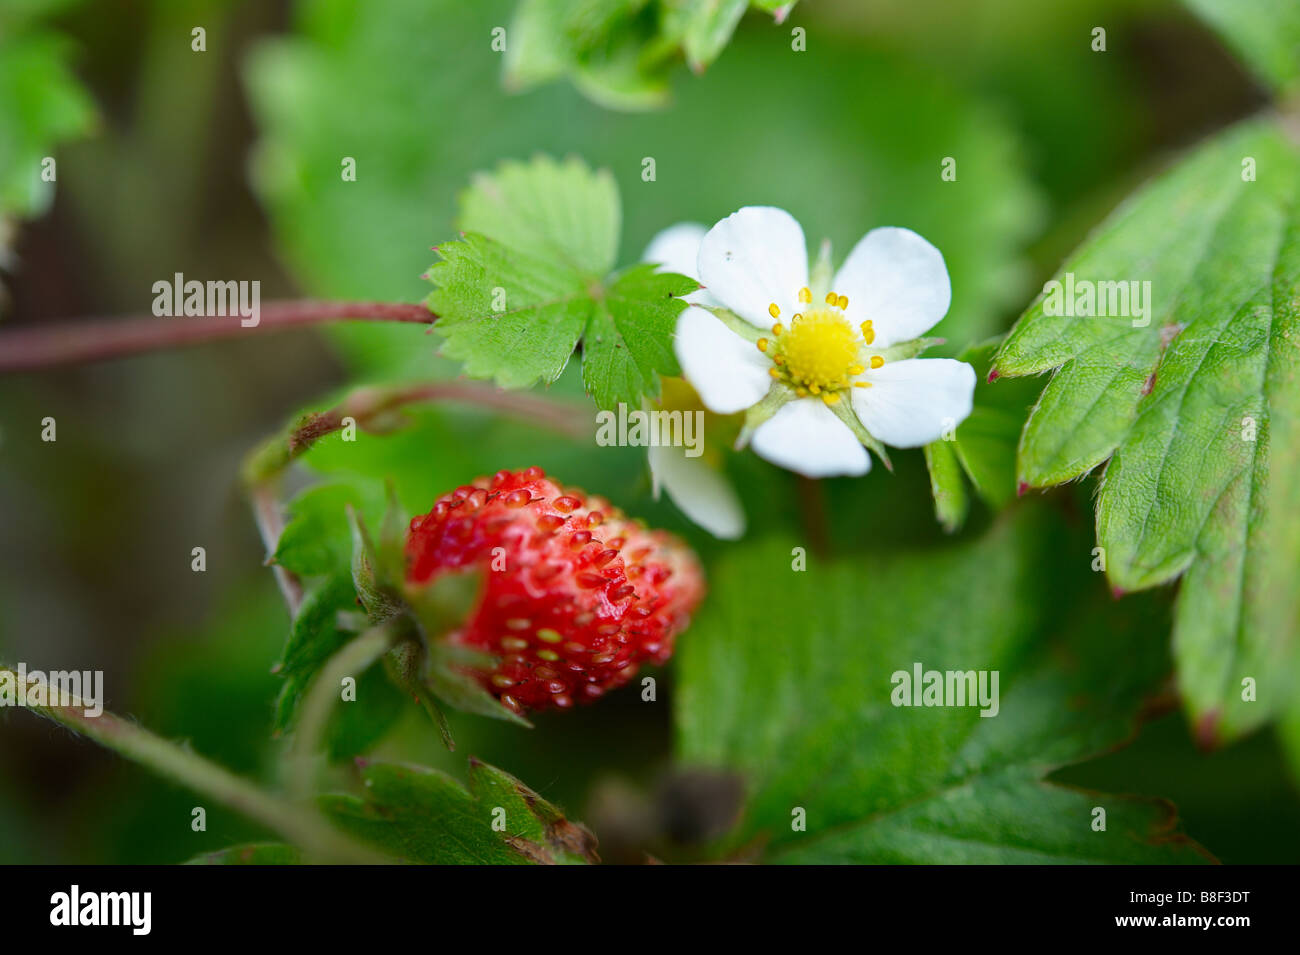 Wild strawberry and wild strawberry flower on a strawberry plant growing  in a garden Stock Photo